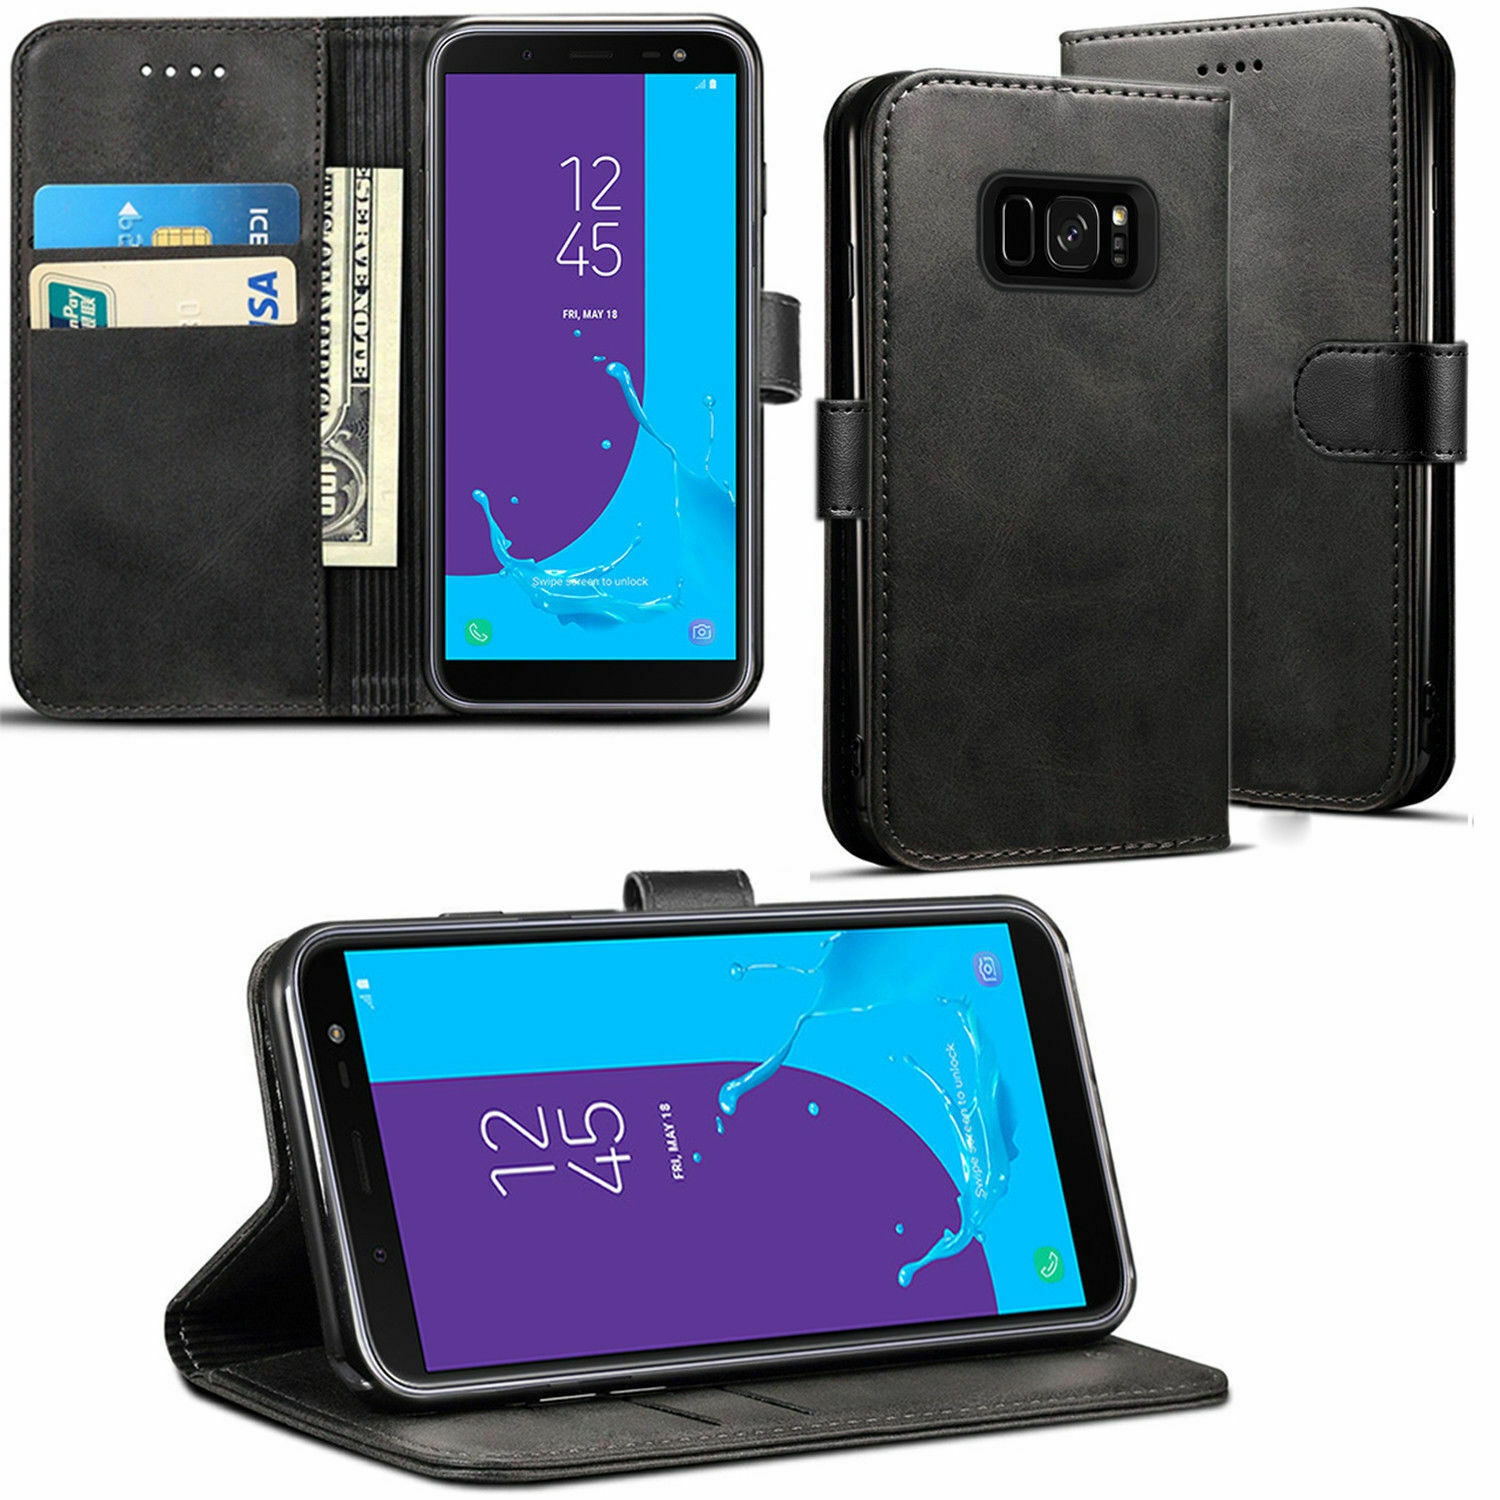 【CSmart】 Magnetic Card Slot Leather Folio Wallet Flip Case Cover for Samsung Galaxy S8 Plus, Black